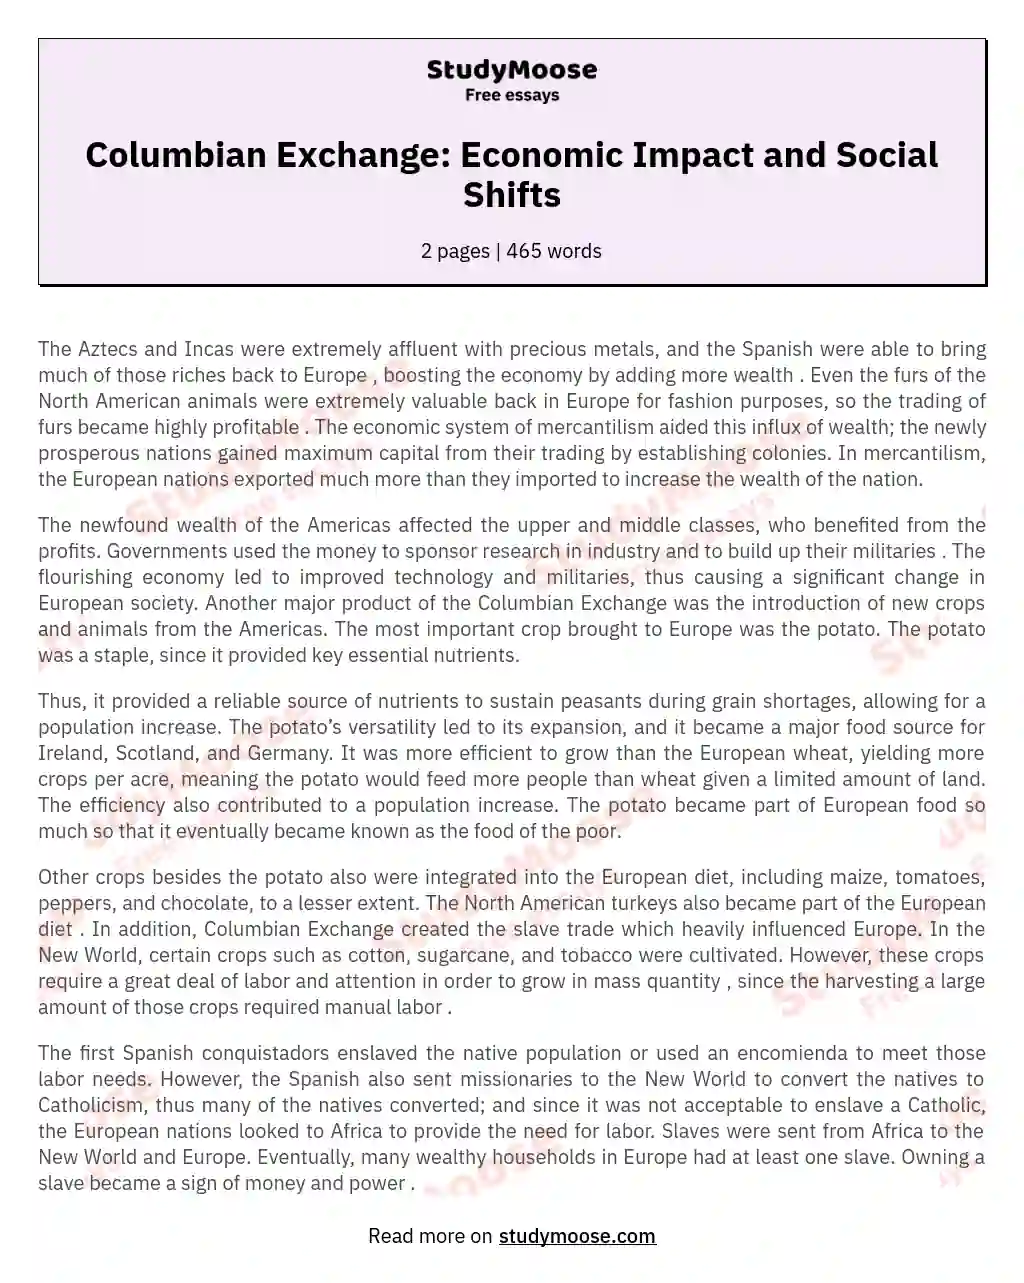 Columbian Exchange: Economic Impact and Social Shifts essay